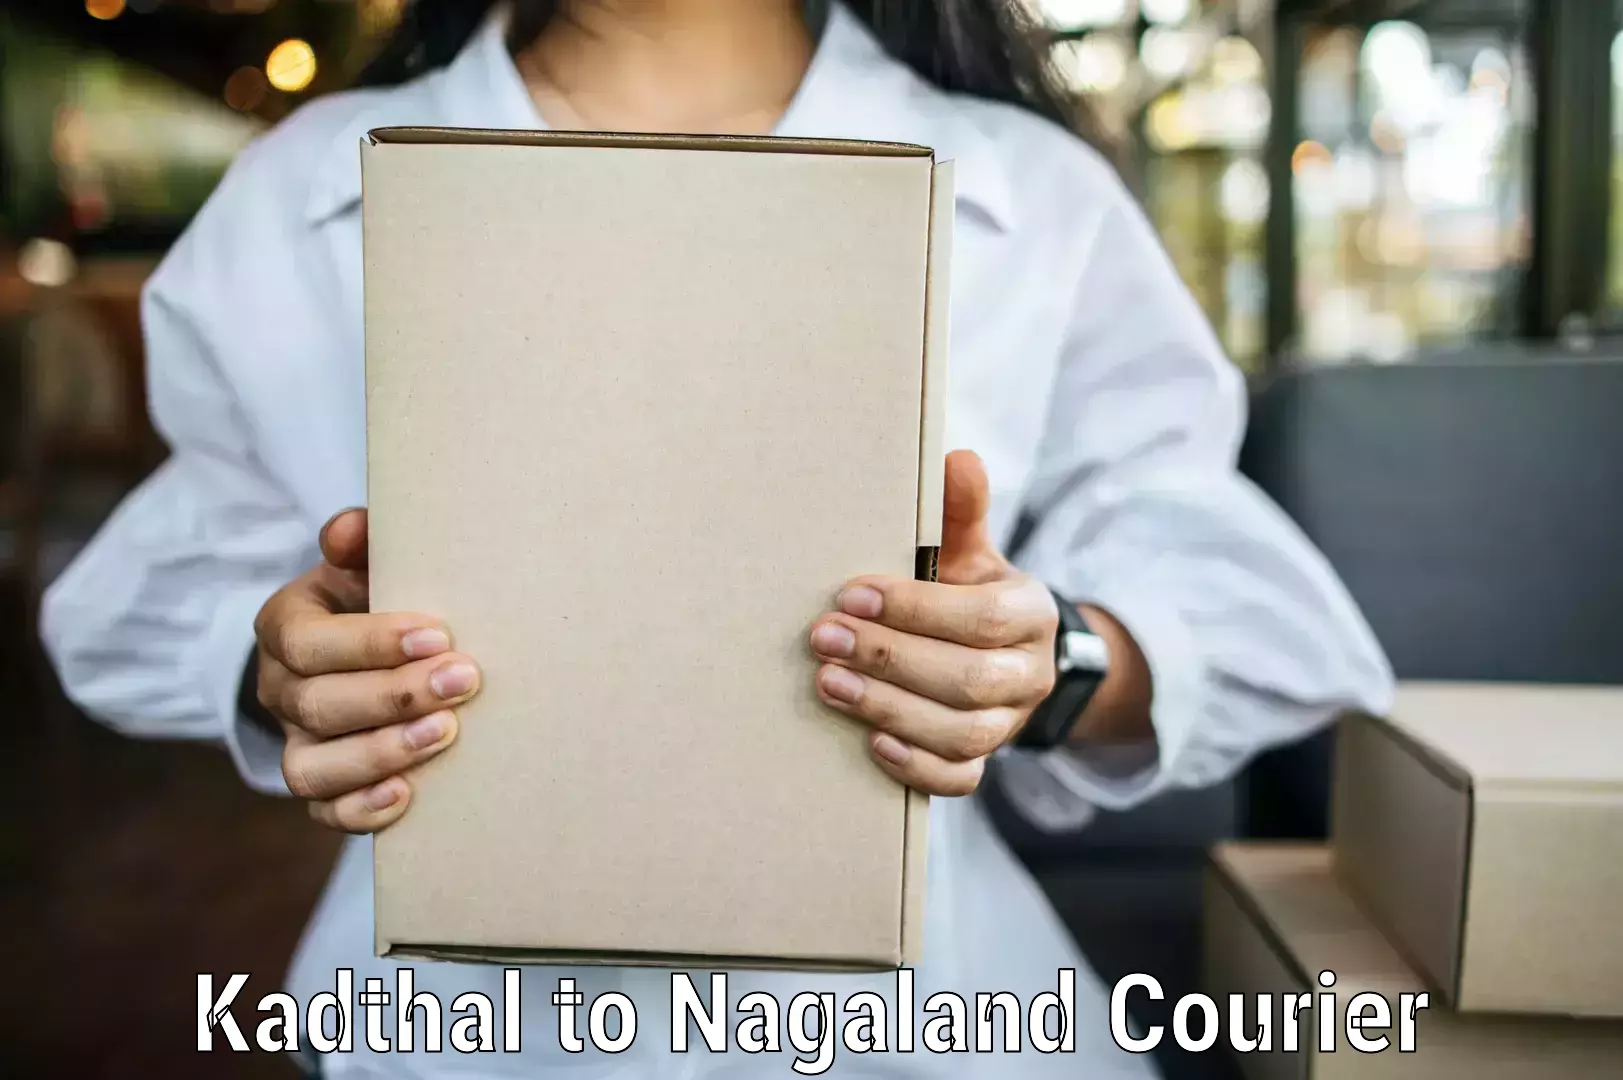 Local delivery service Kadthal to Nagaland